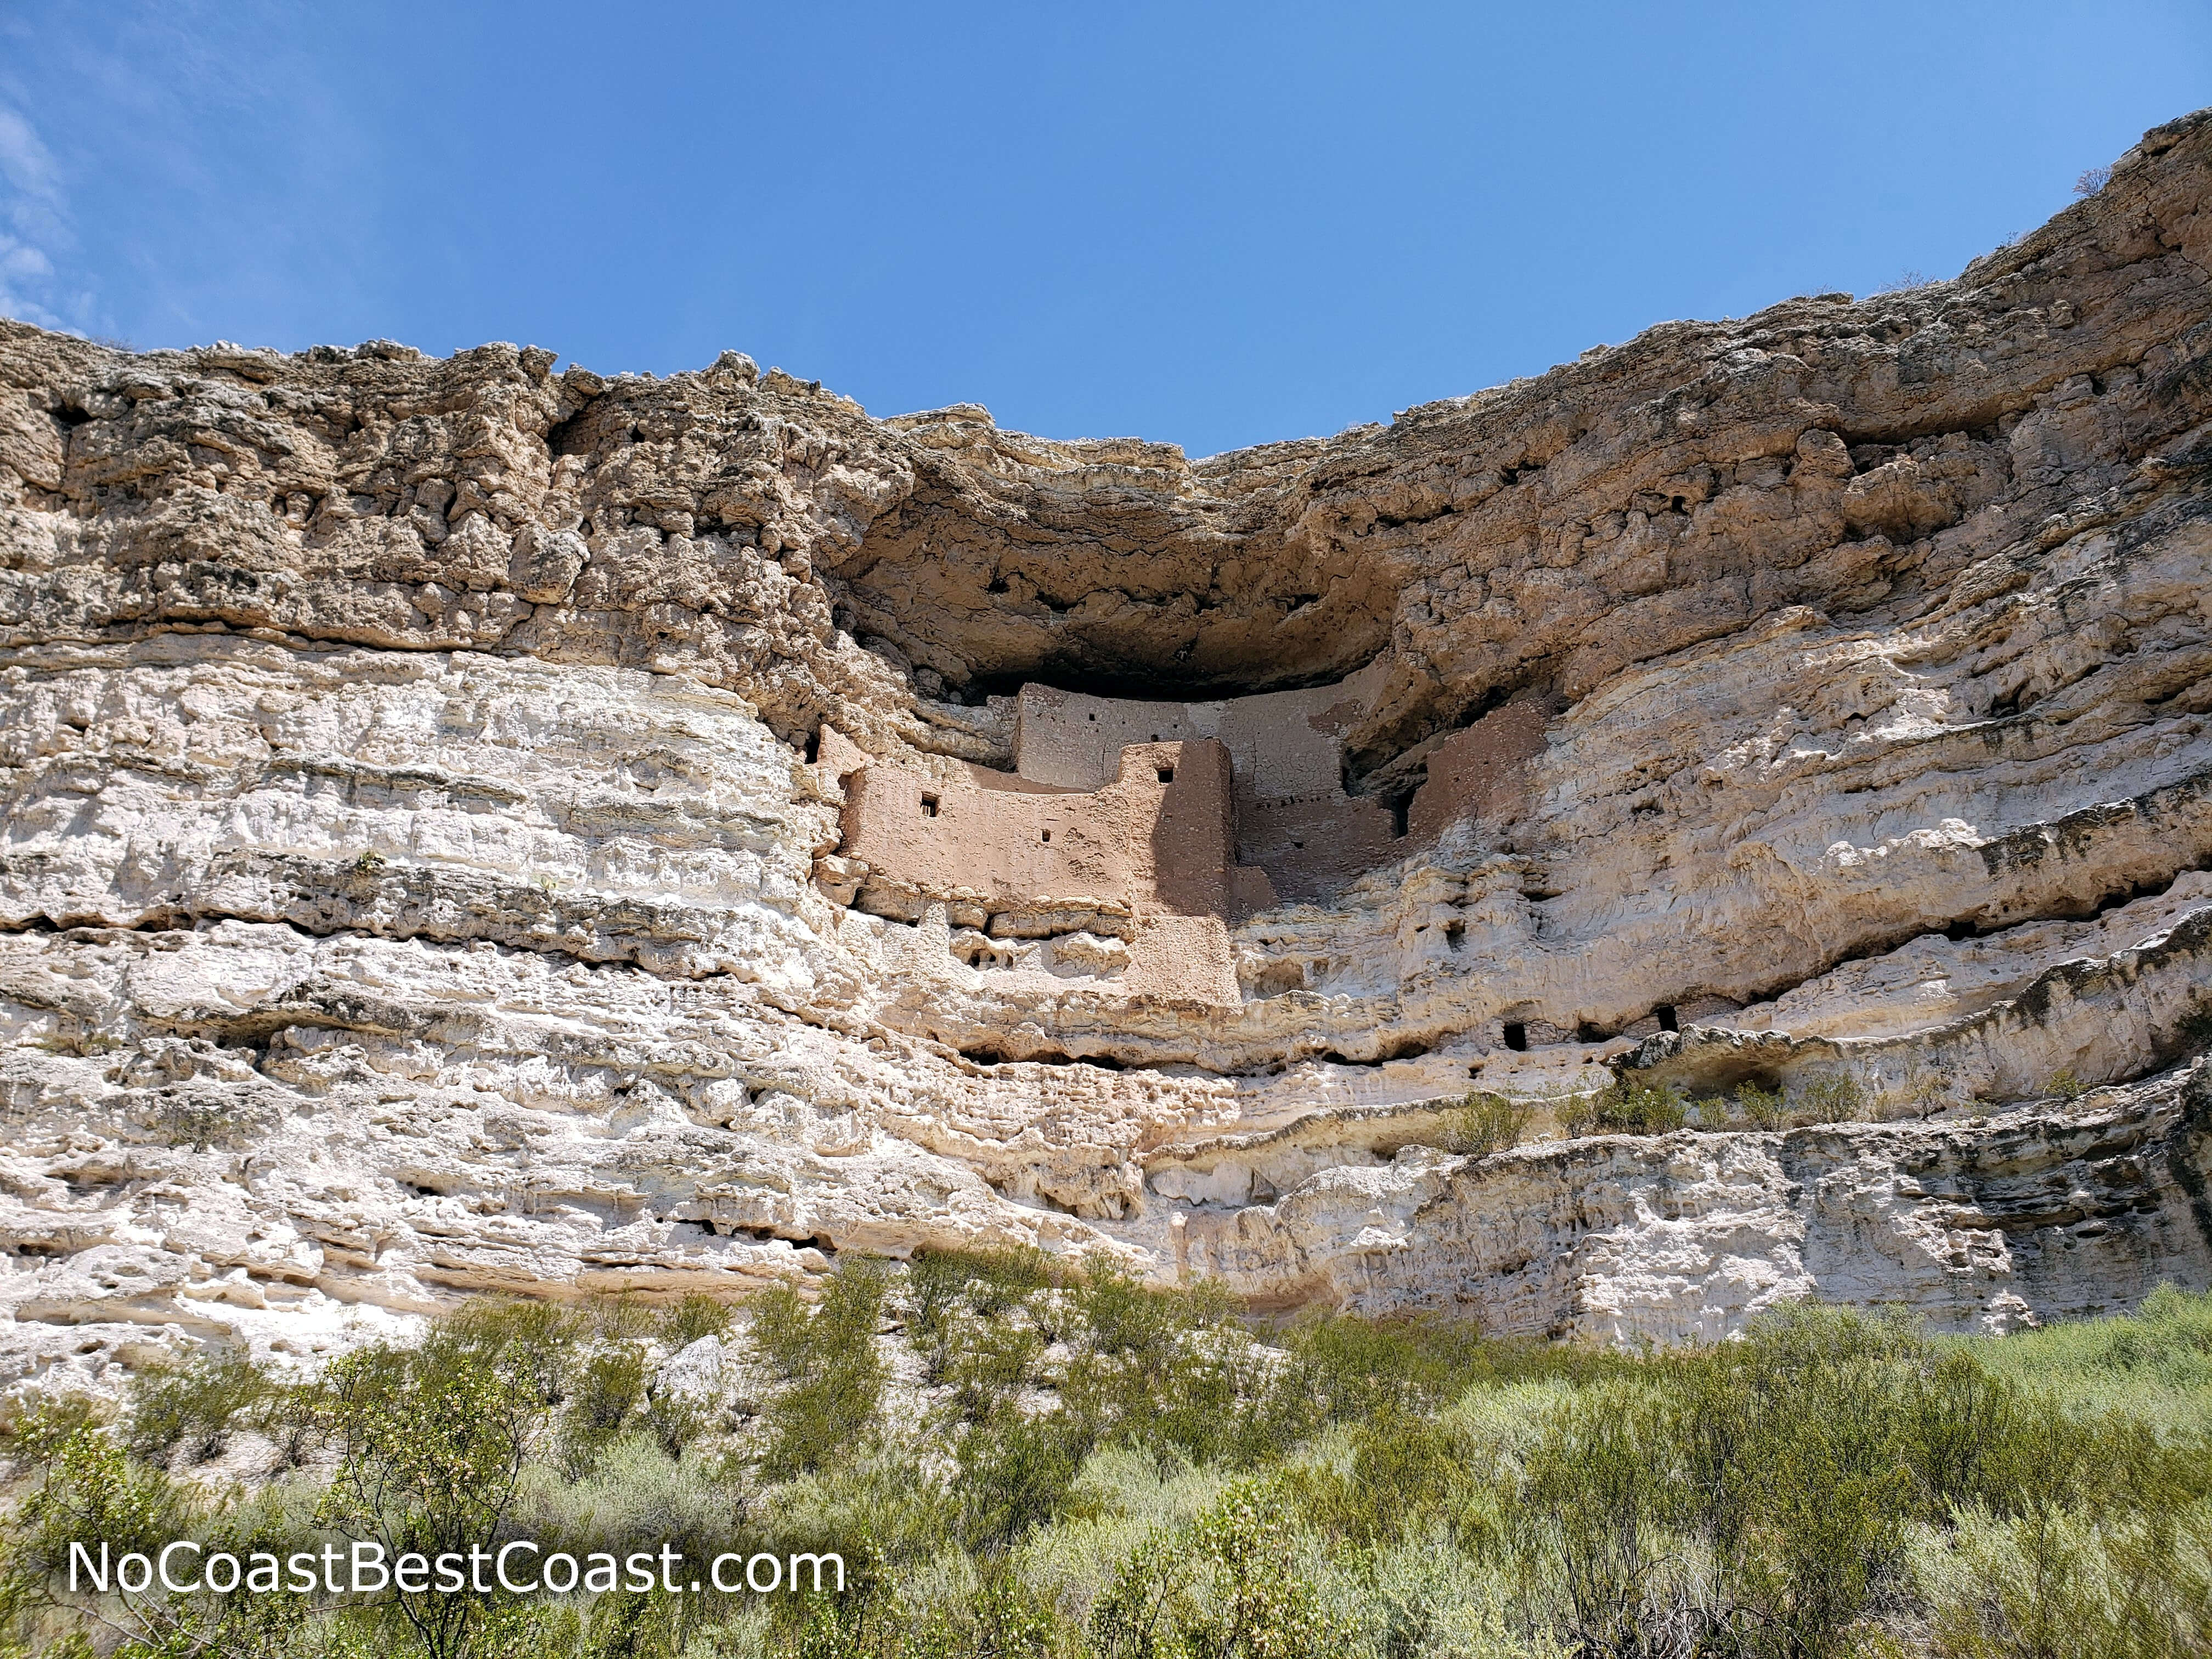 Montezuma Castle built directly into the cliff above